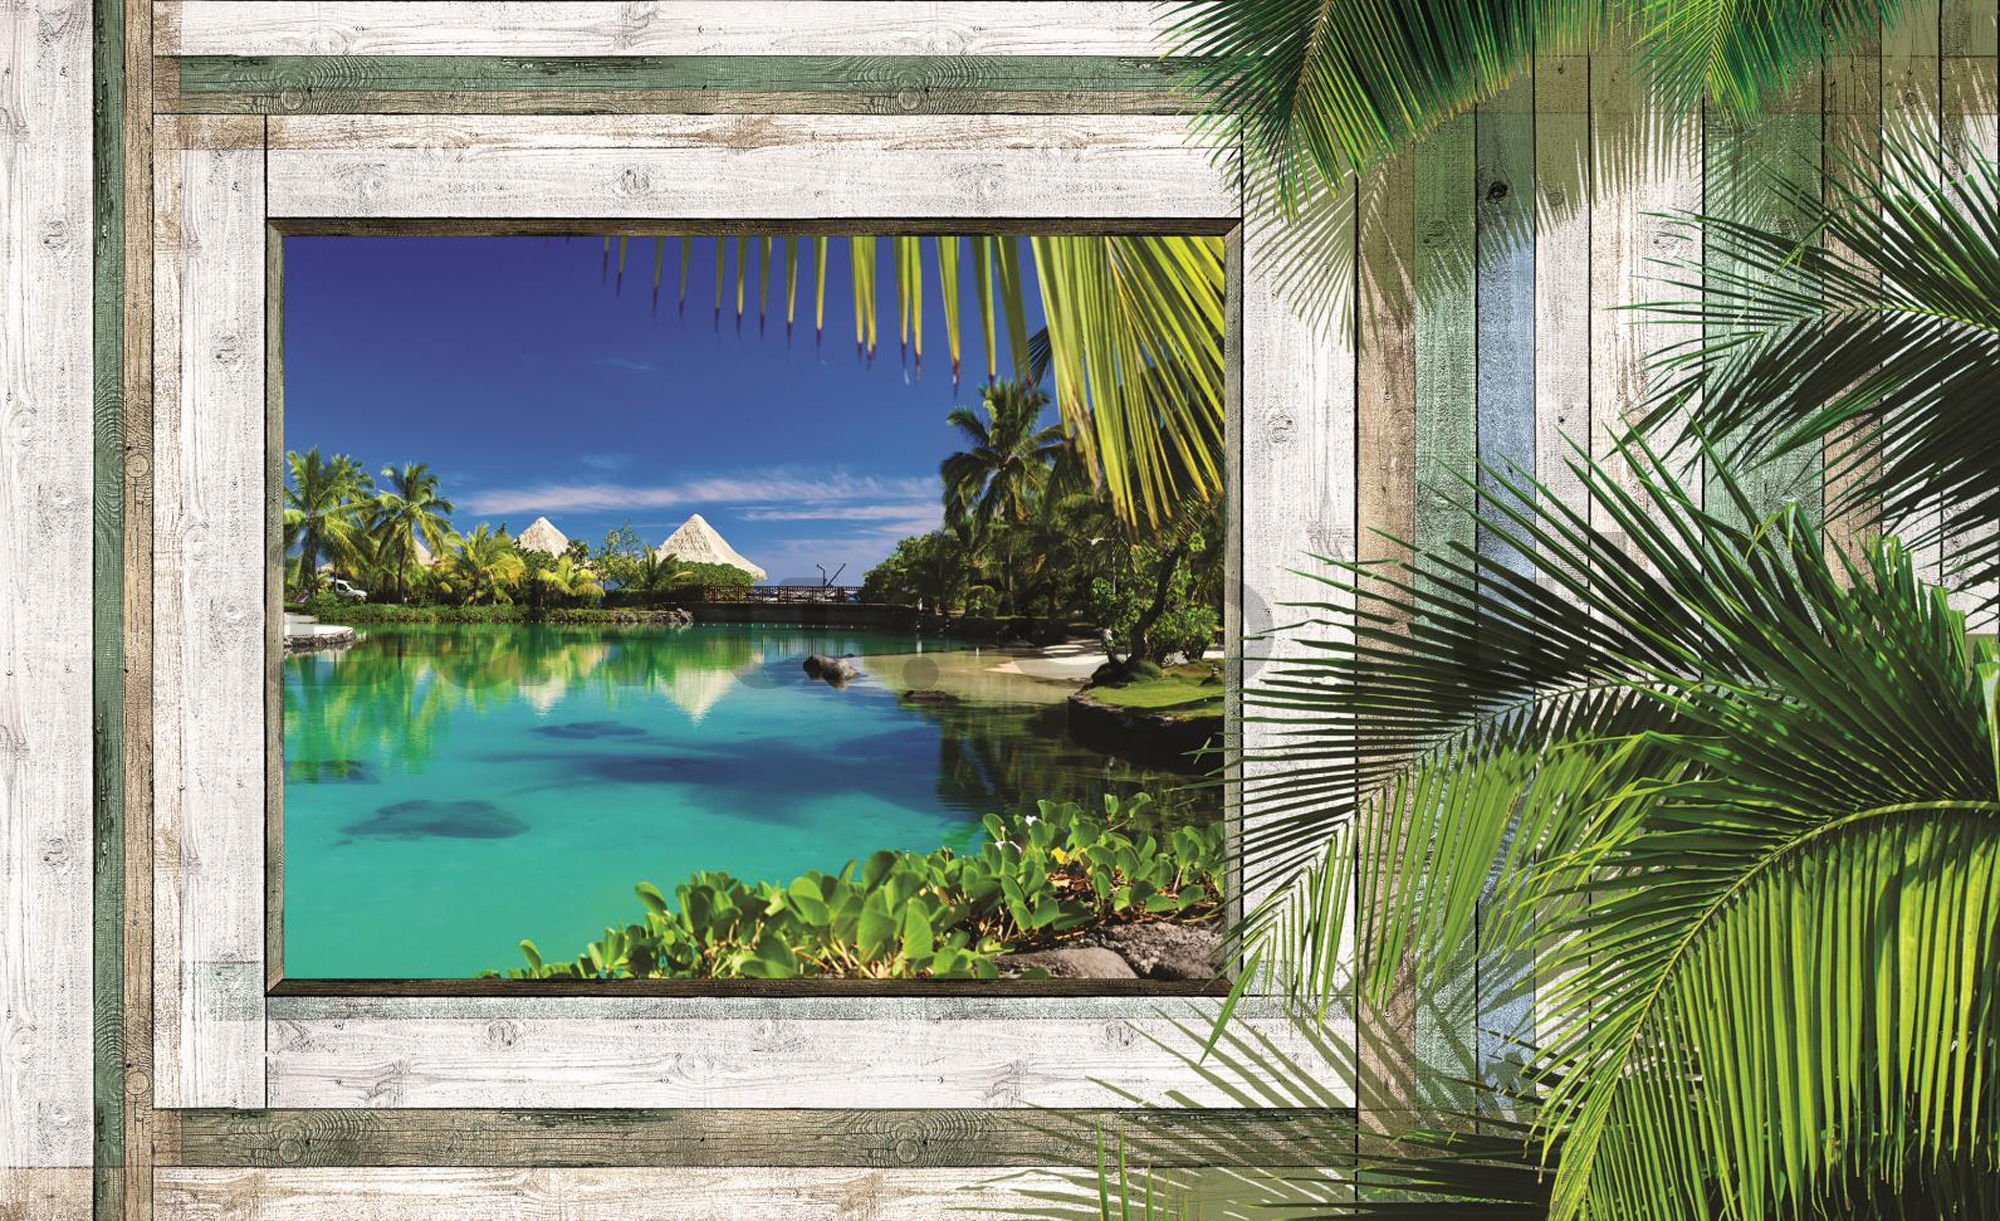 Wall Mural: Window to paradise (1) - 184x254 cm